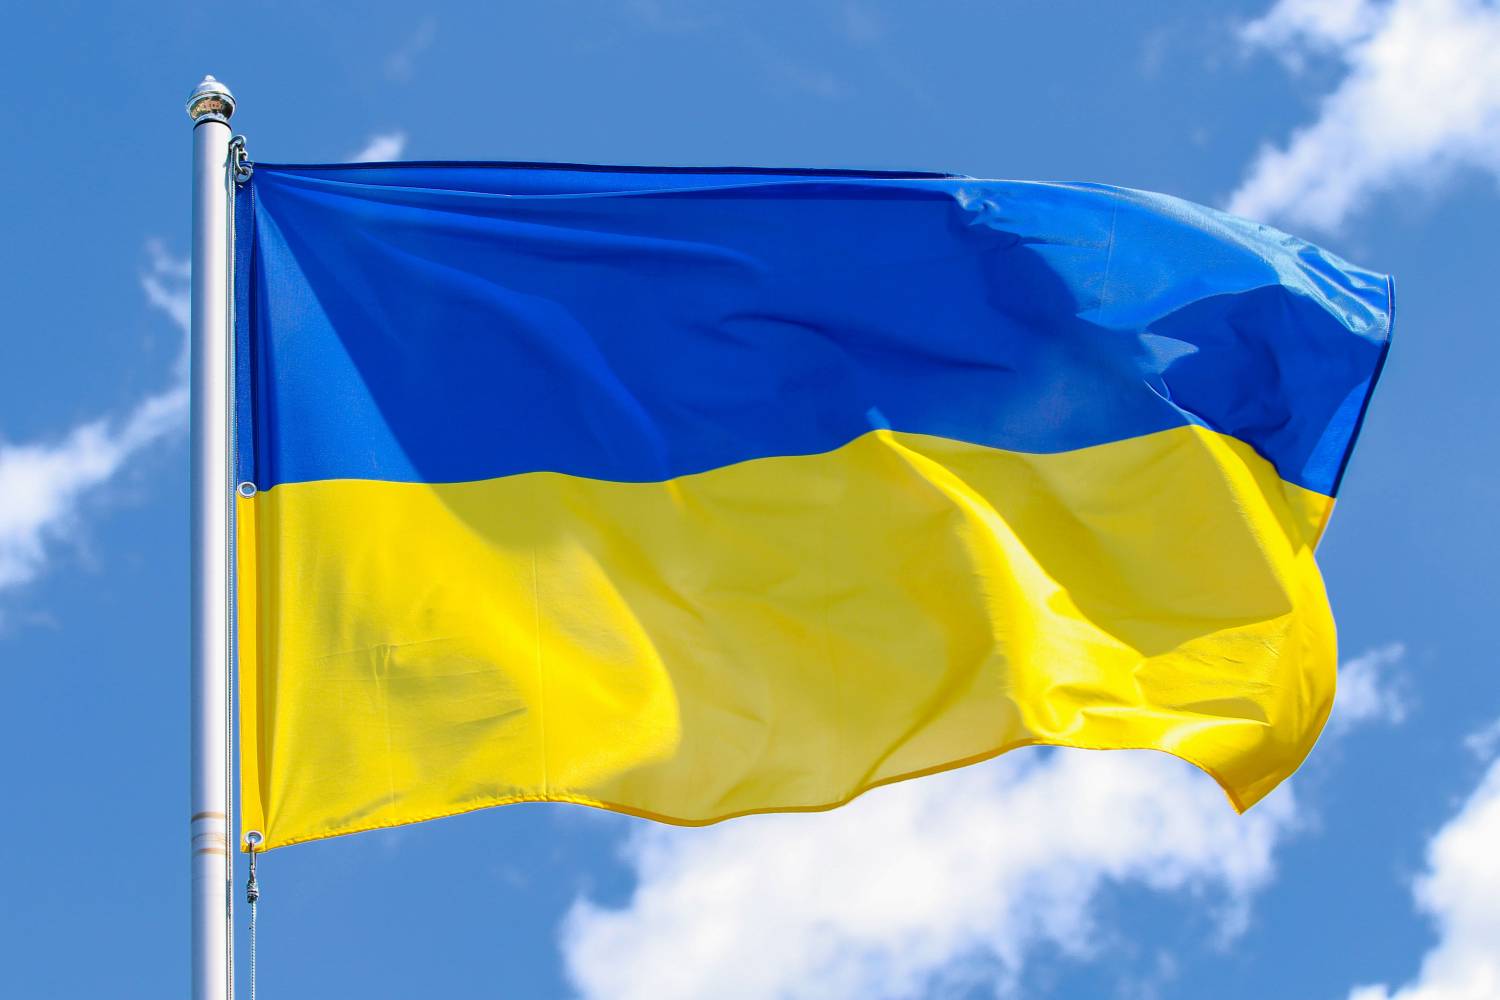 MCI | The Entrepreneurial School® stands in solidarity with all people in Ukraine and Russia who are against the brutal aggression. ©Adobe Stock